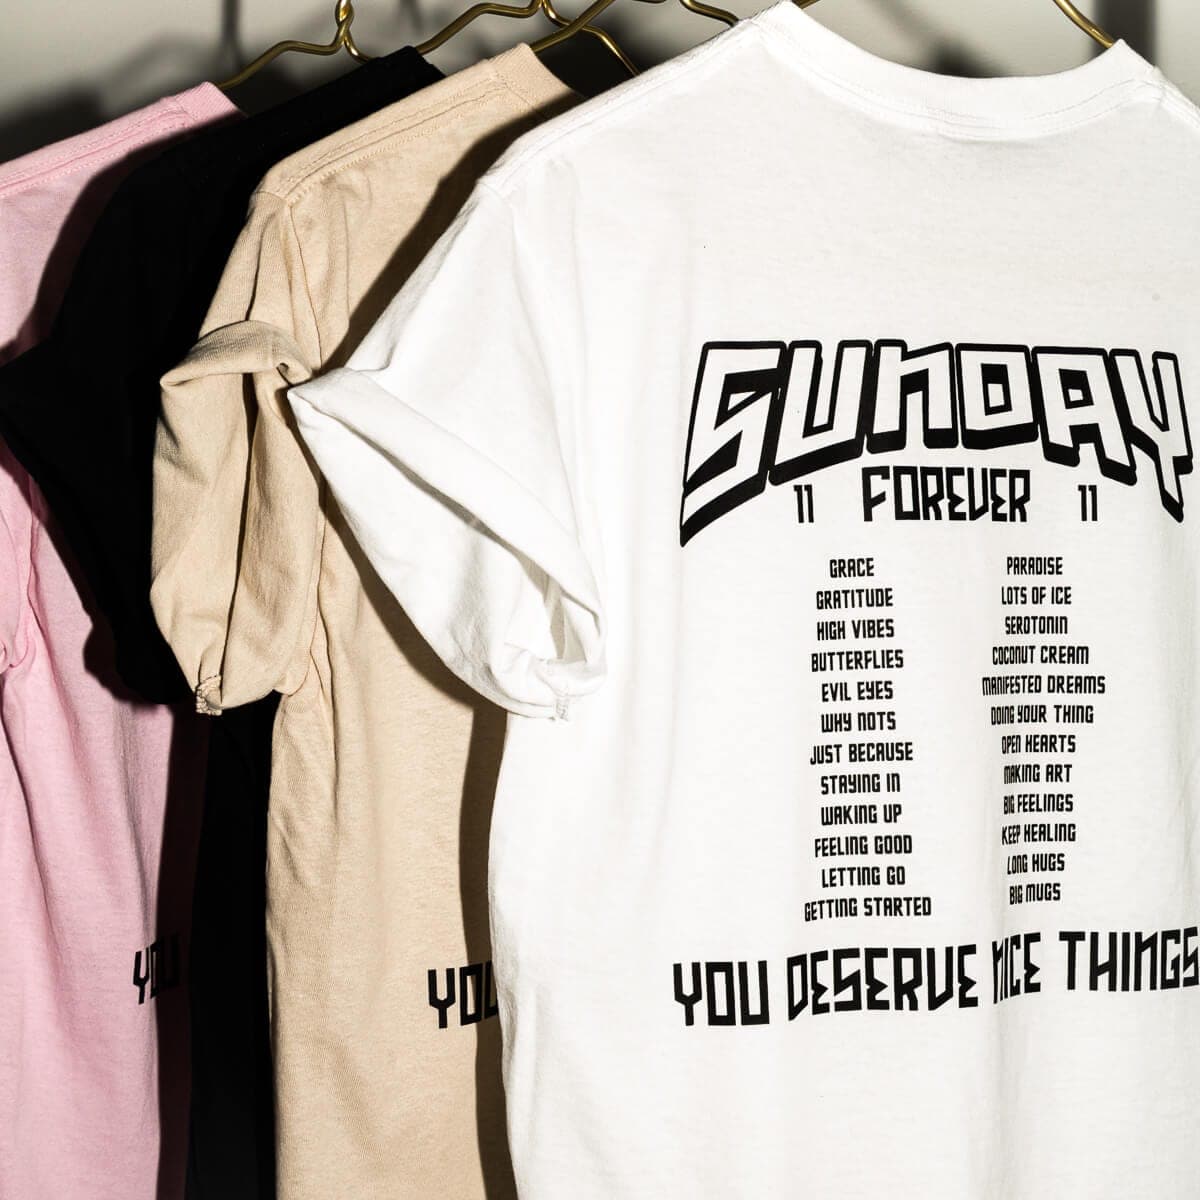 Sunday Forever Nice Things Band Tees - Shirts & Tops-Sunday Forever